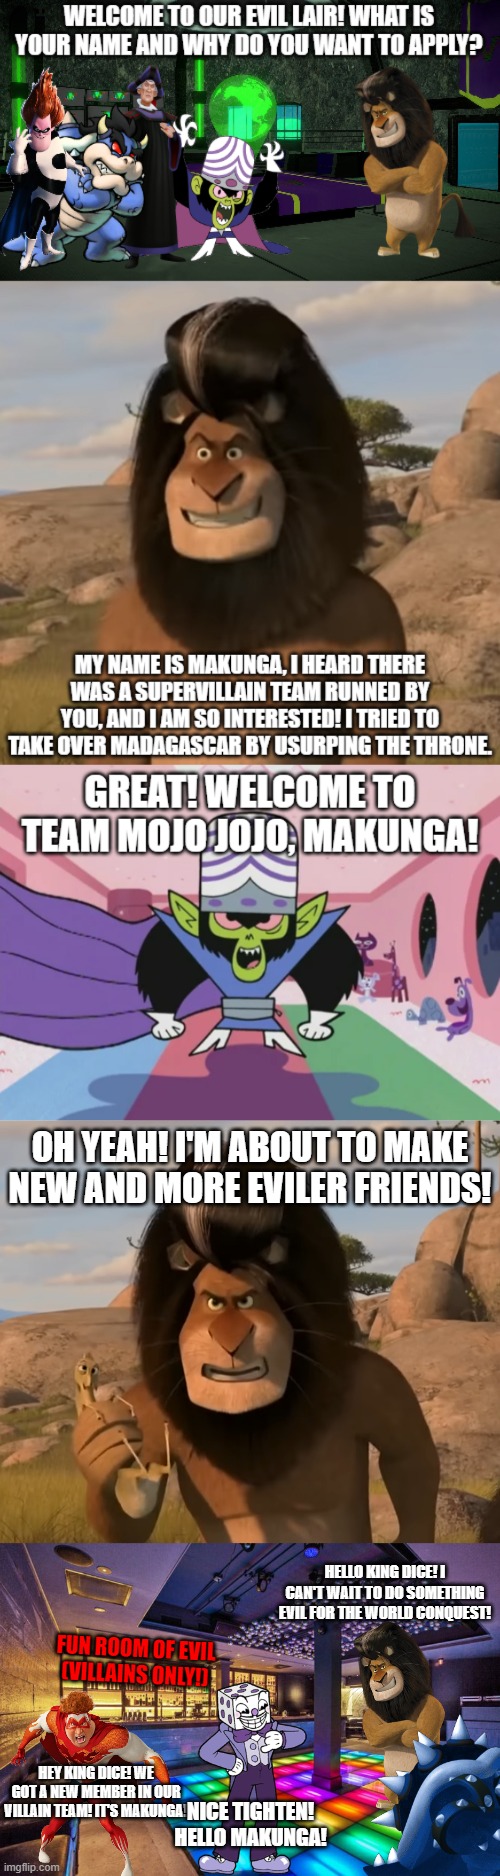 Makunga Joins Team Mojo Jojo | OH YEAH! I'M ABOUT TO MAKE NEW AND MORE EVILER FRIENDS! HELLO KING DICE! I CAN'T WAIT TO DO SOMETHING EVIL FOR THE WORLD CONQUEST! FUN ROOM OF EVIL
(VILLAINS ONLY!); HEY KING DICE! WE GOT A NEW MEMBER IN OUR VILLAIN TEAM! IT'S MAKUNGA! NICE TIGHTEN! HELLO MAKUNGA! | image tagged in team mojo jojo,villains | made w/ Imgflip meme maker